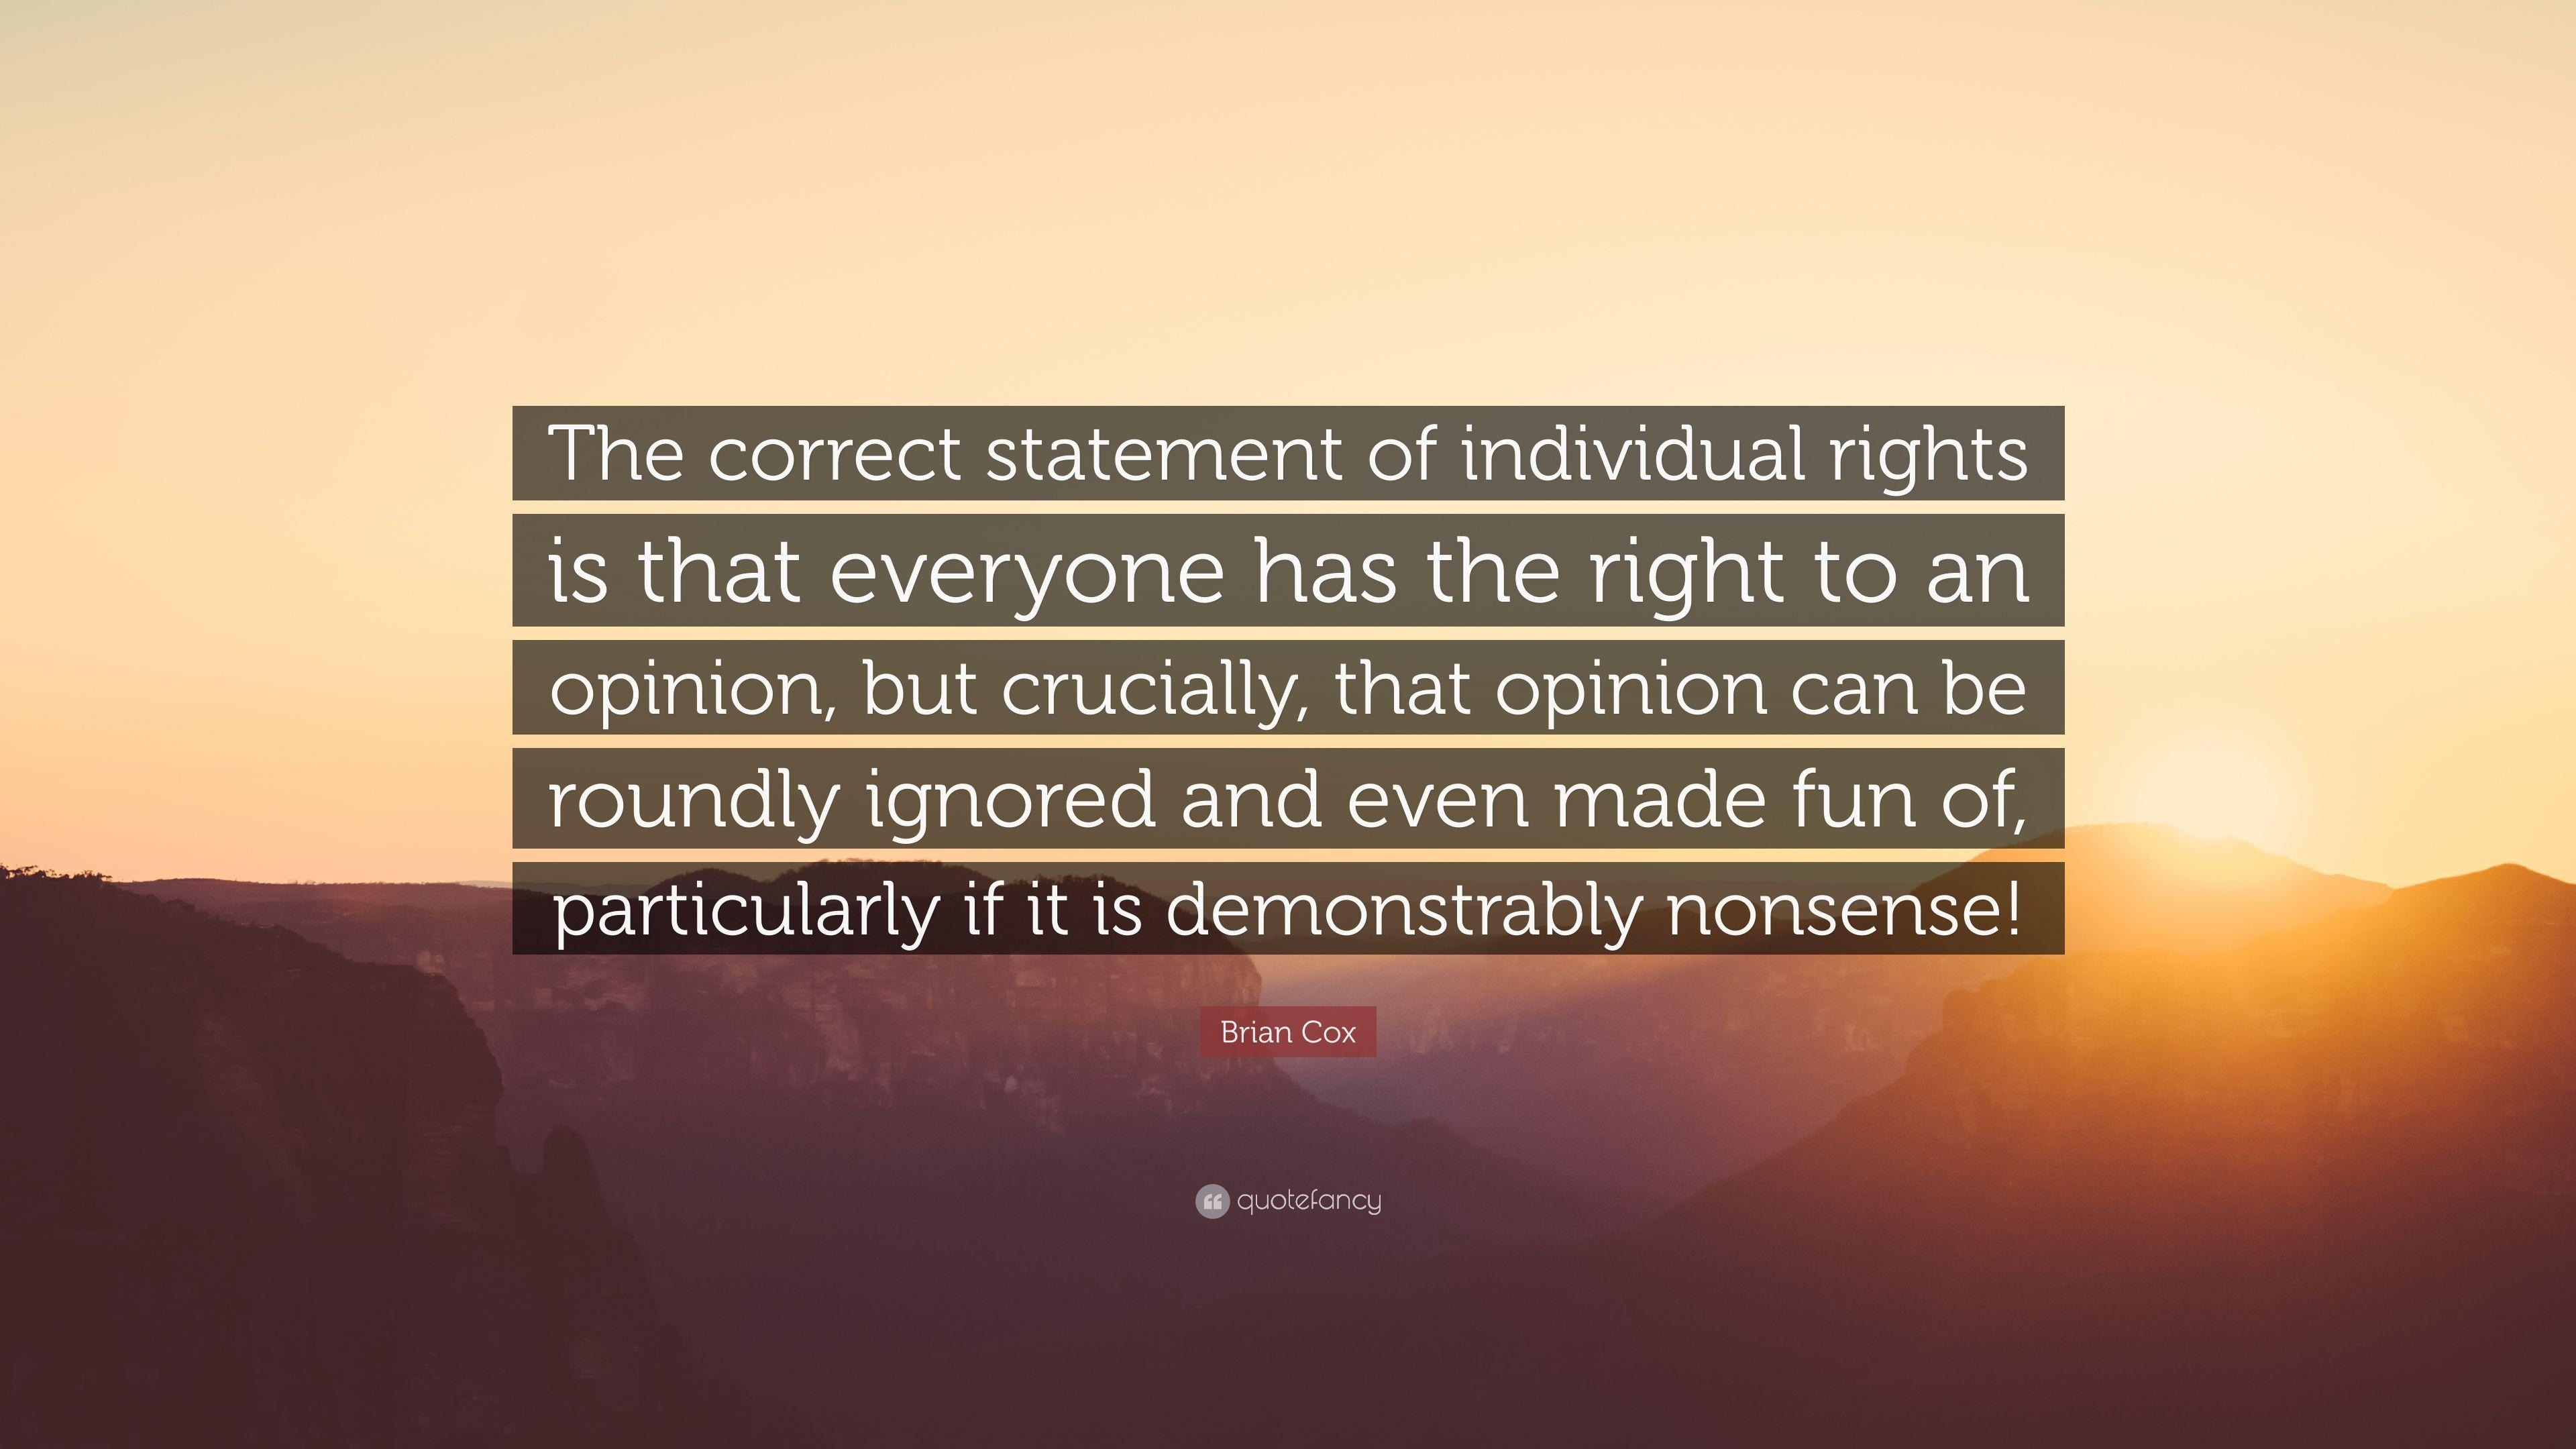 Brian Cox Quote: “The correct statement of individual rights is